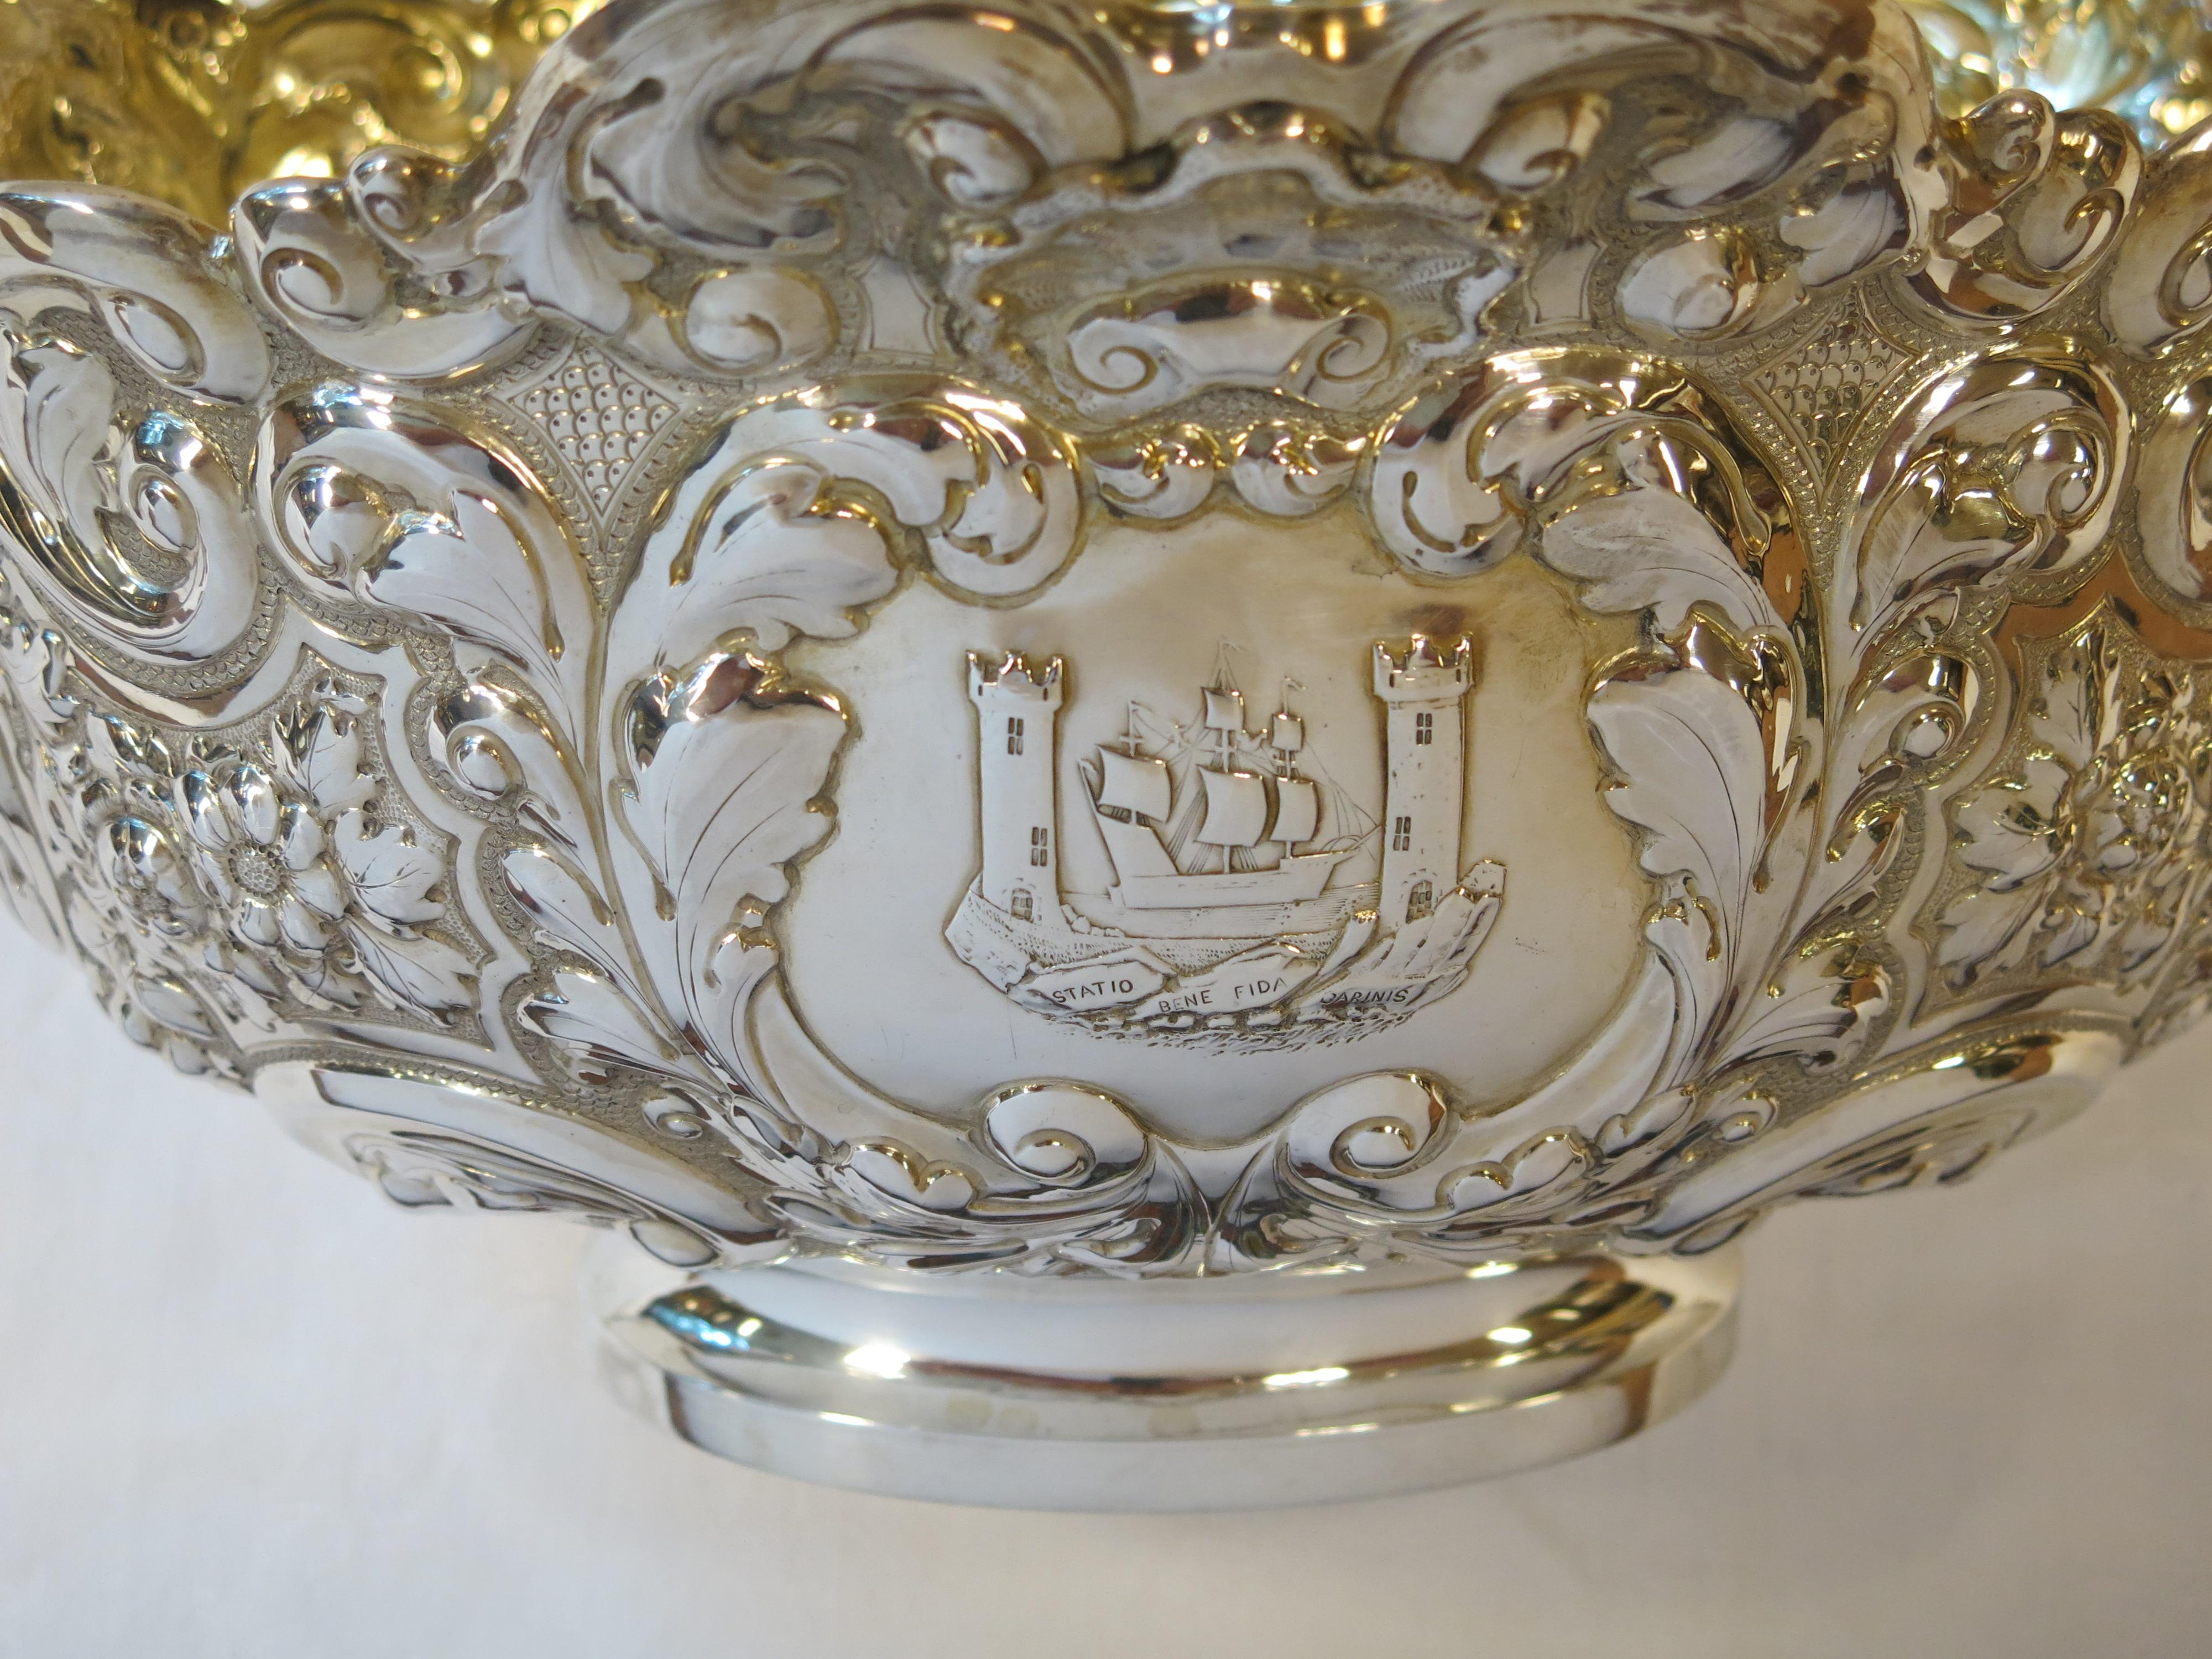 Large and Decorative Antique English Sterling Silver Centerpiece, Irish Interest 1